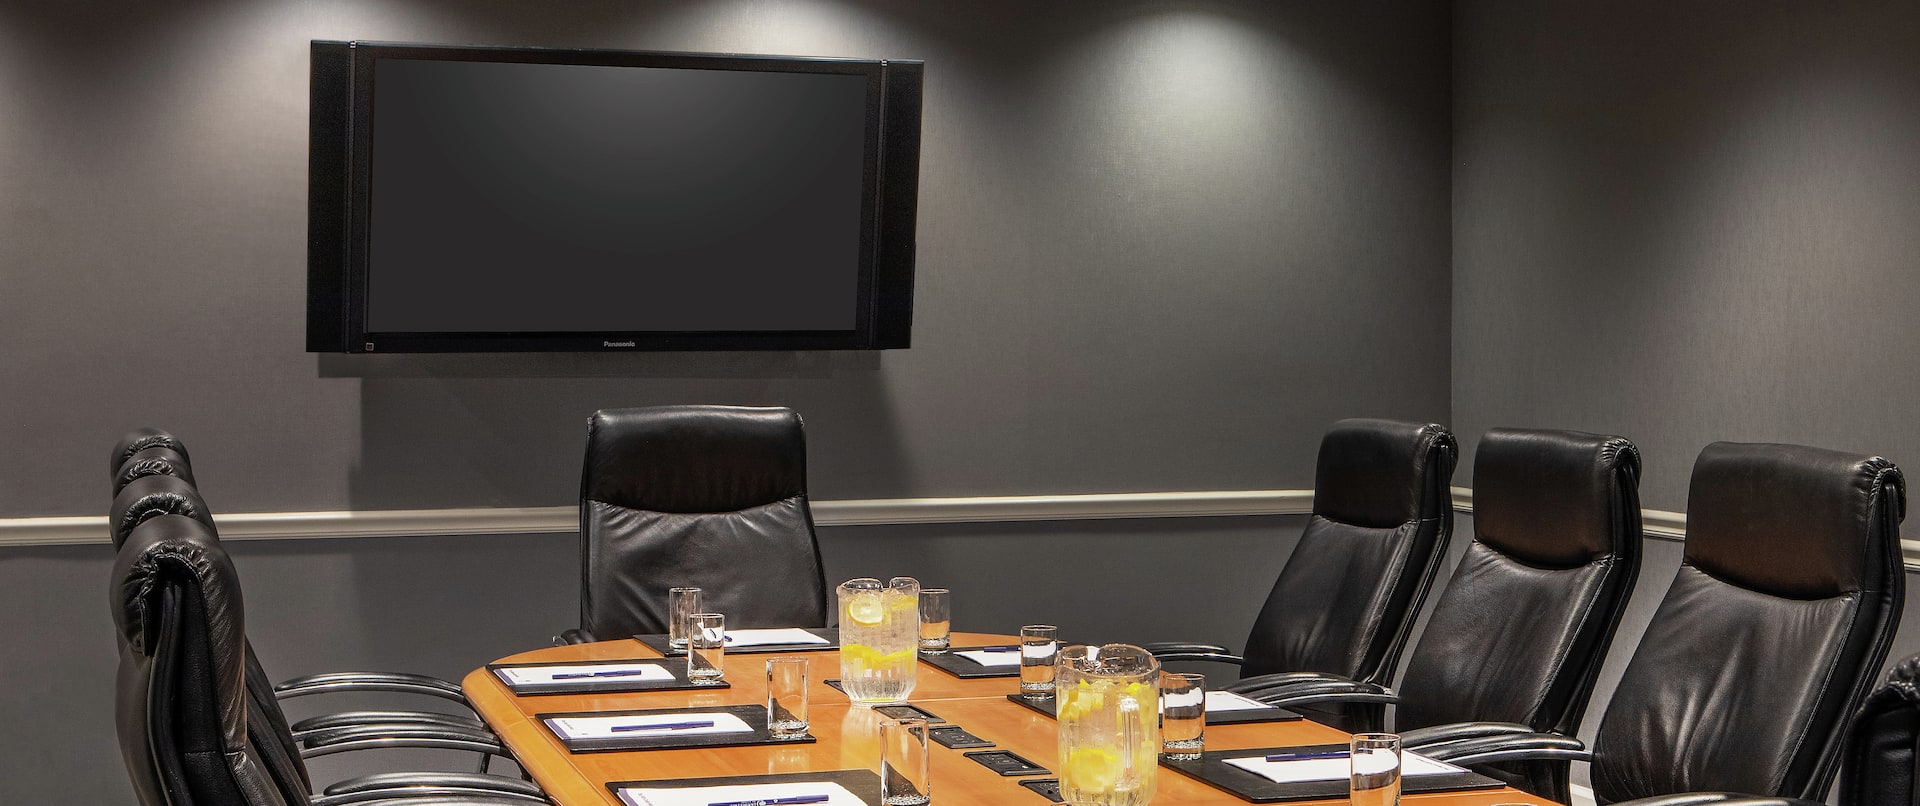 Our Howard Boardroom is Perfect for Productive Meetings to Re-Energize Your Team